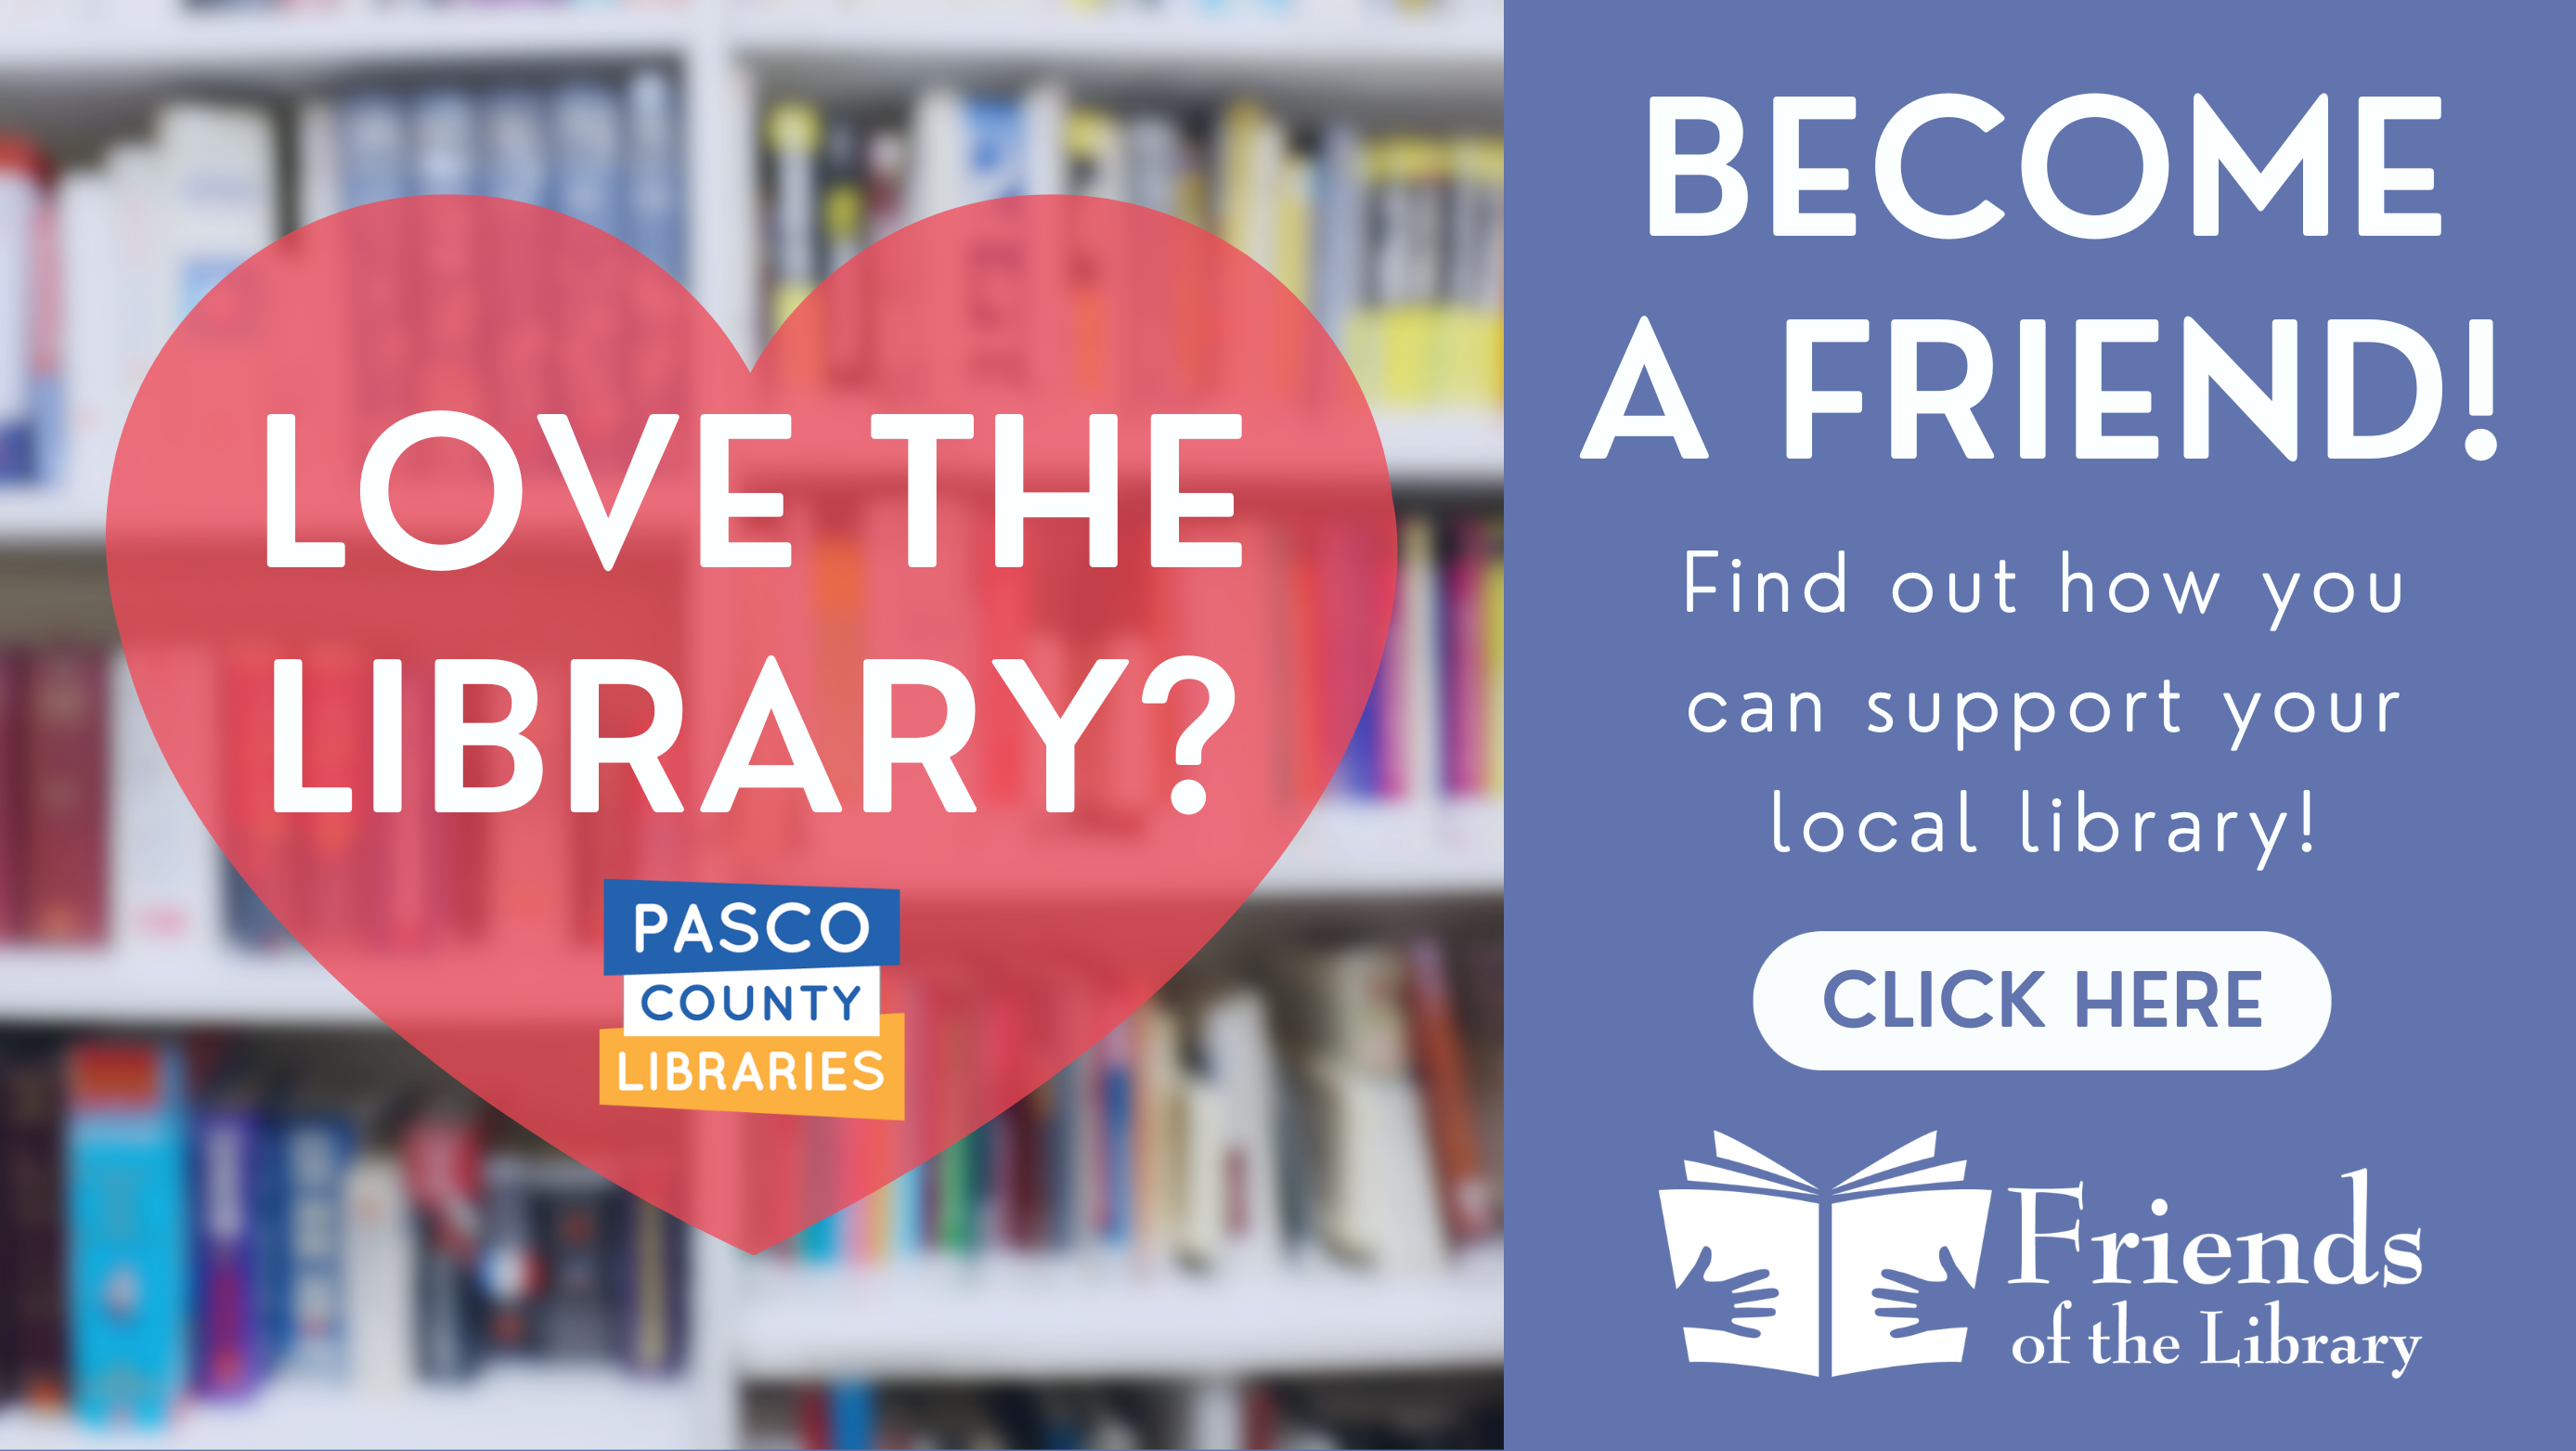 https://www.pascolibraries.org/images/Slider/Friends%20Campaign%20(Web%20Banner)%20Updated.png